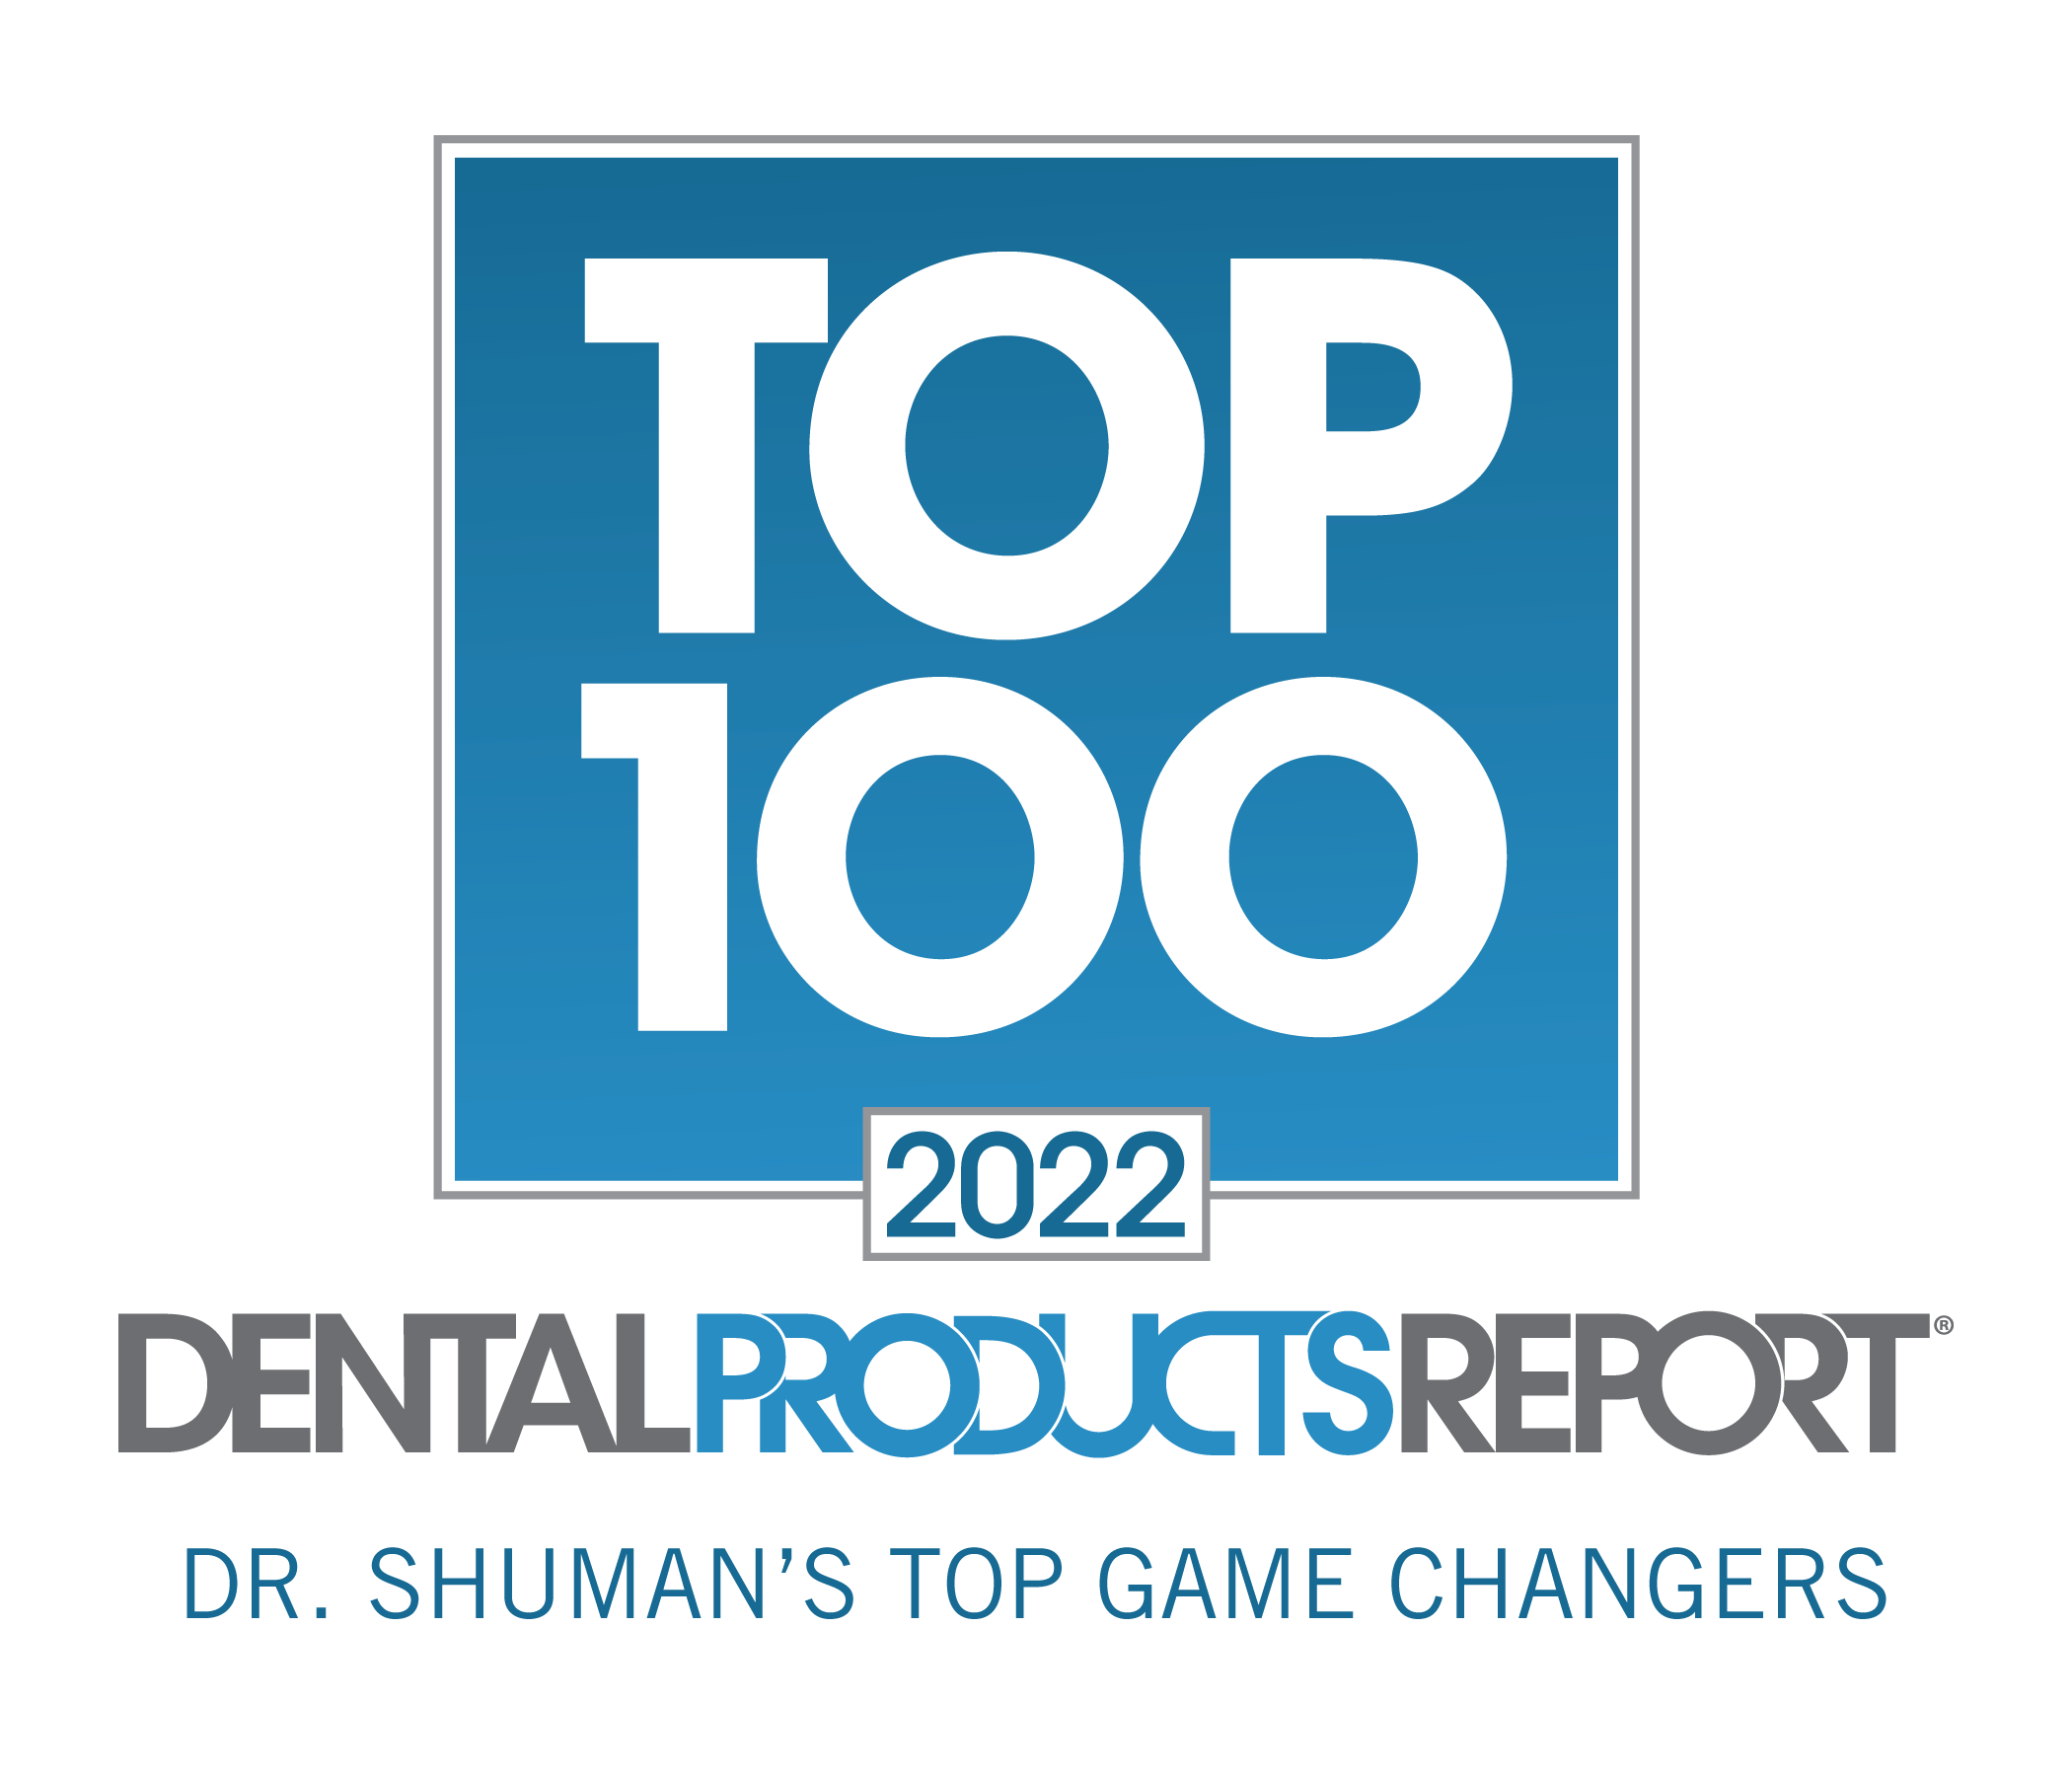 Top Game Changers of 2022